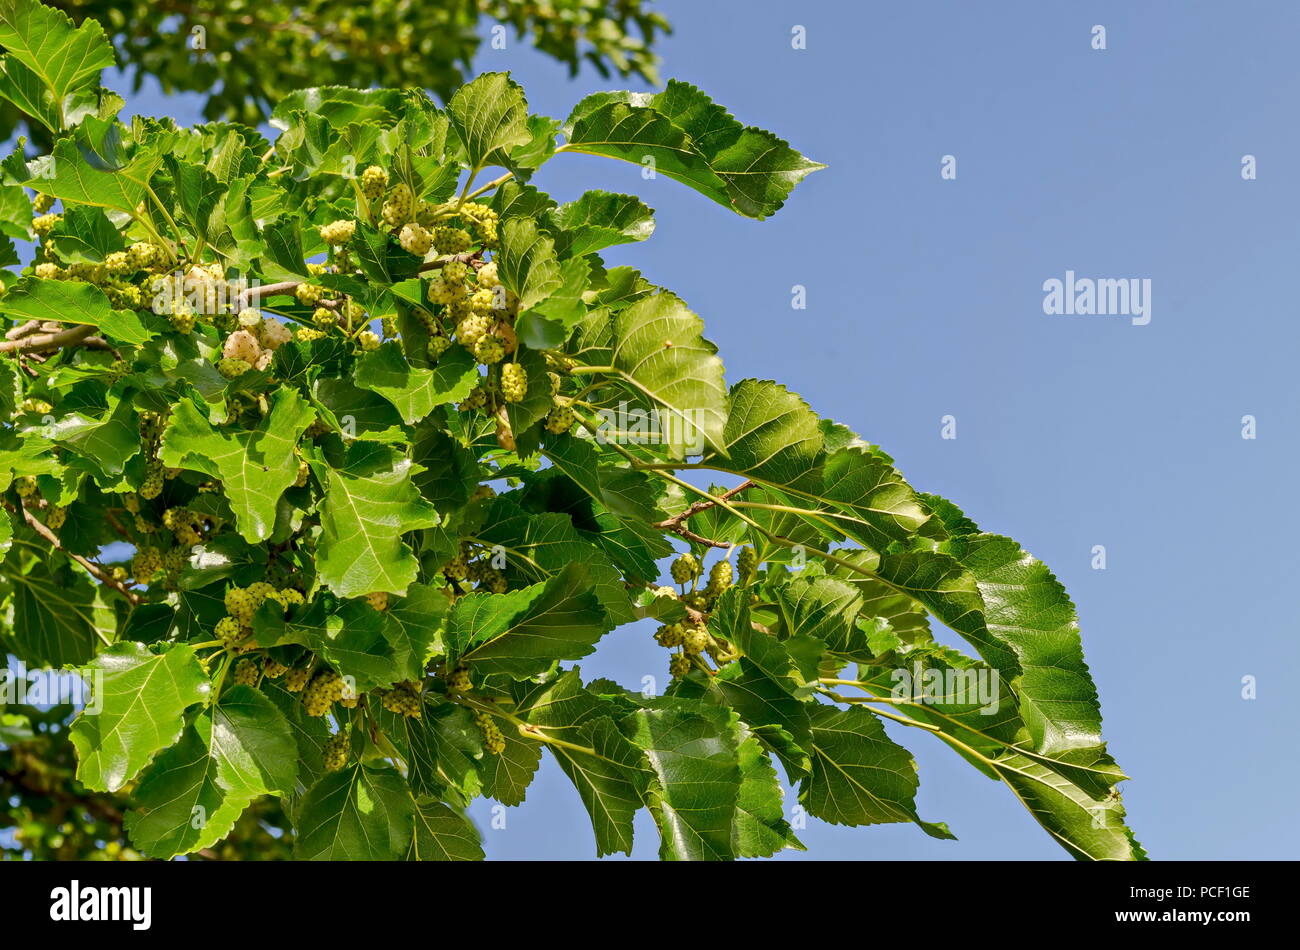 Branch with ripe and unripe fruits of White mulberry or Morus alba tree in garden, district Drujba, Sofia, Bulgaria Stock Photo